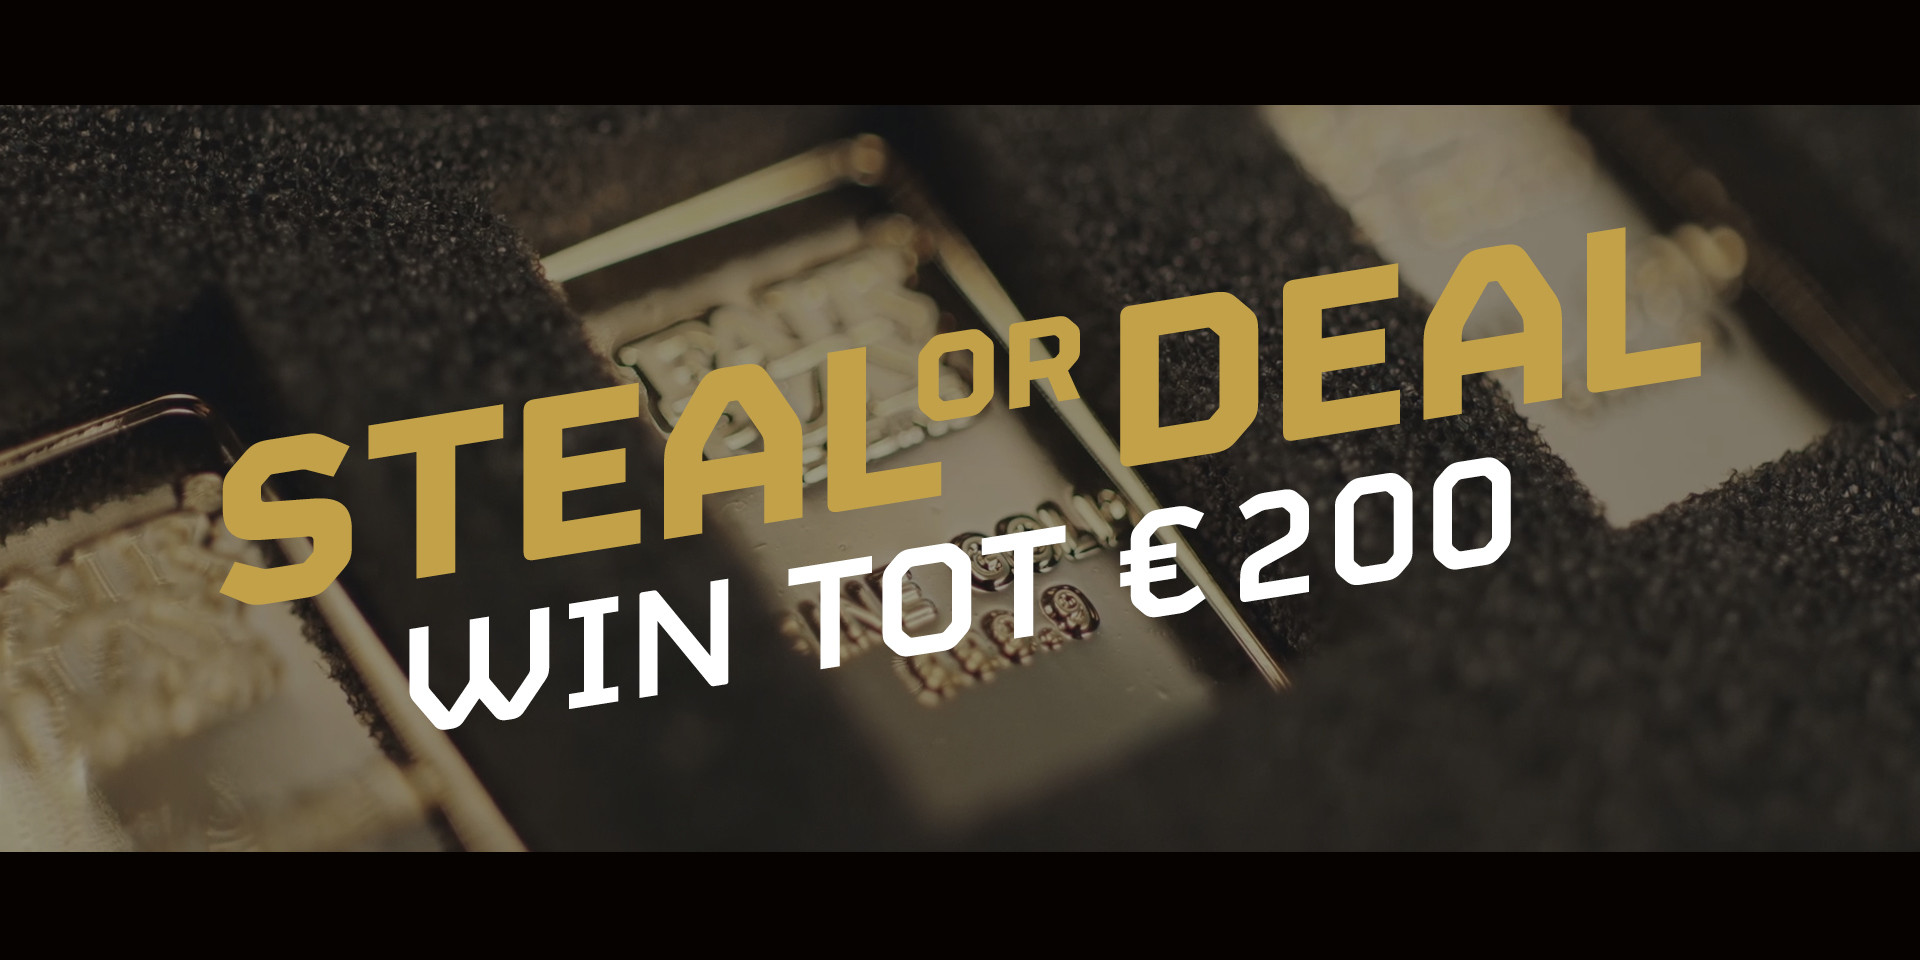 STEAL OR DEAL ROTTERDAM